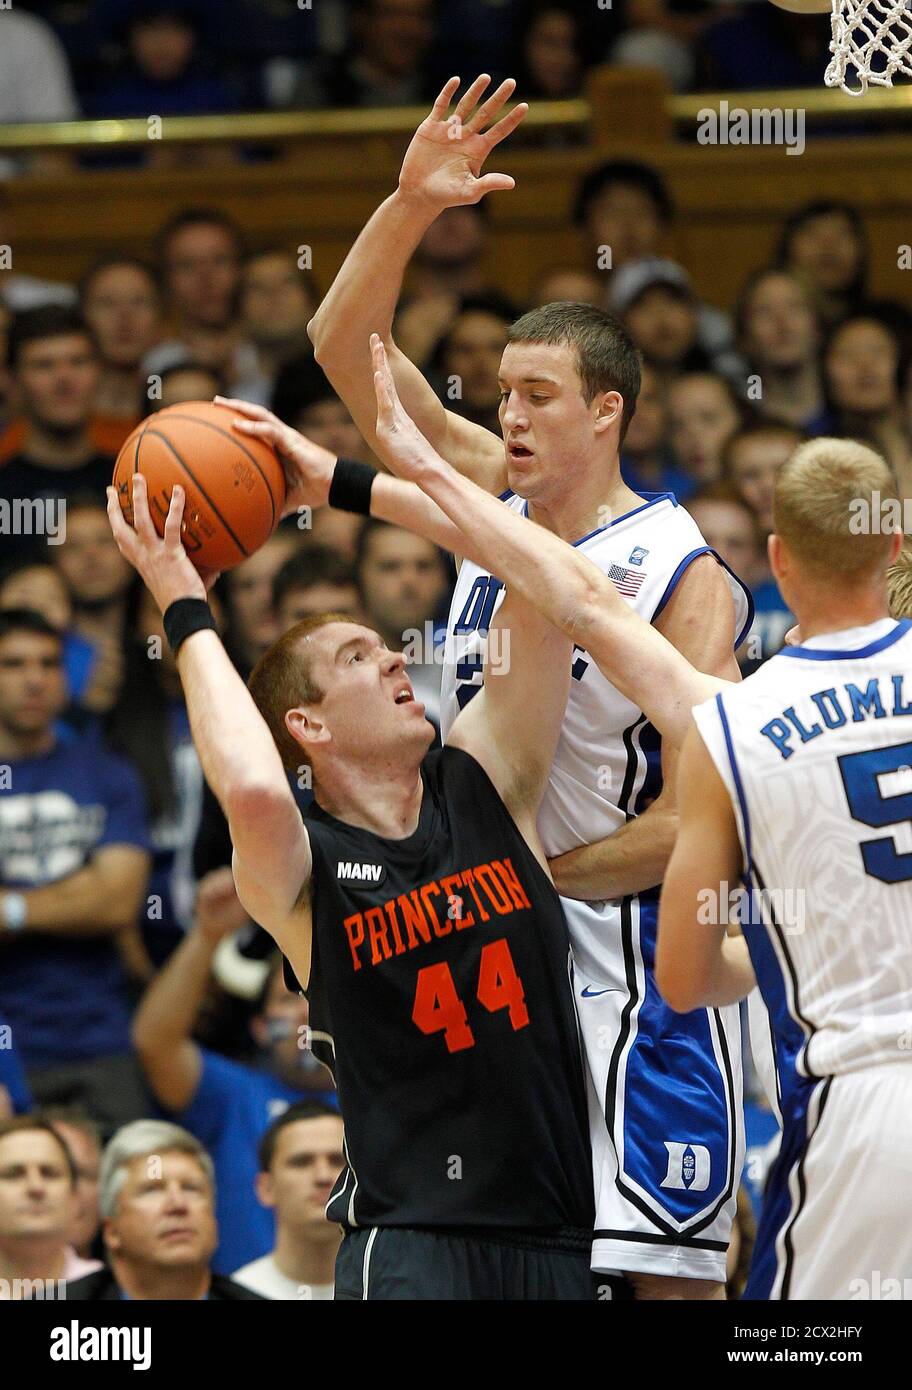 Princeton University's Brendan Connolly (L) is stopped short of the basket  by Duke University's Miles Plumlee (C) and Mason Plumlee during the first  half of their NCAA basketball game in Durham, North